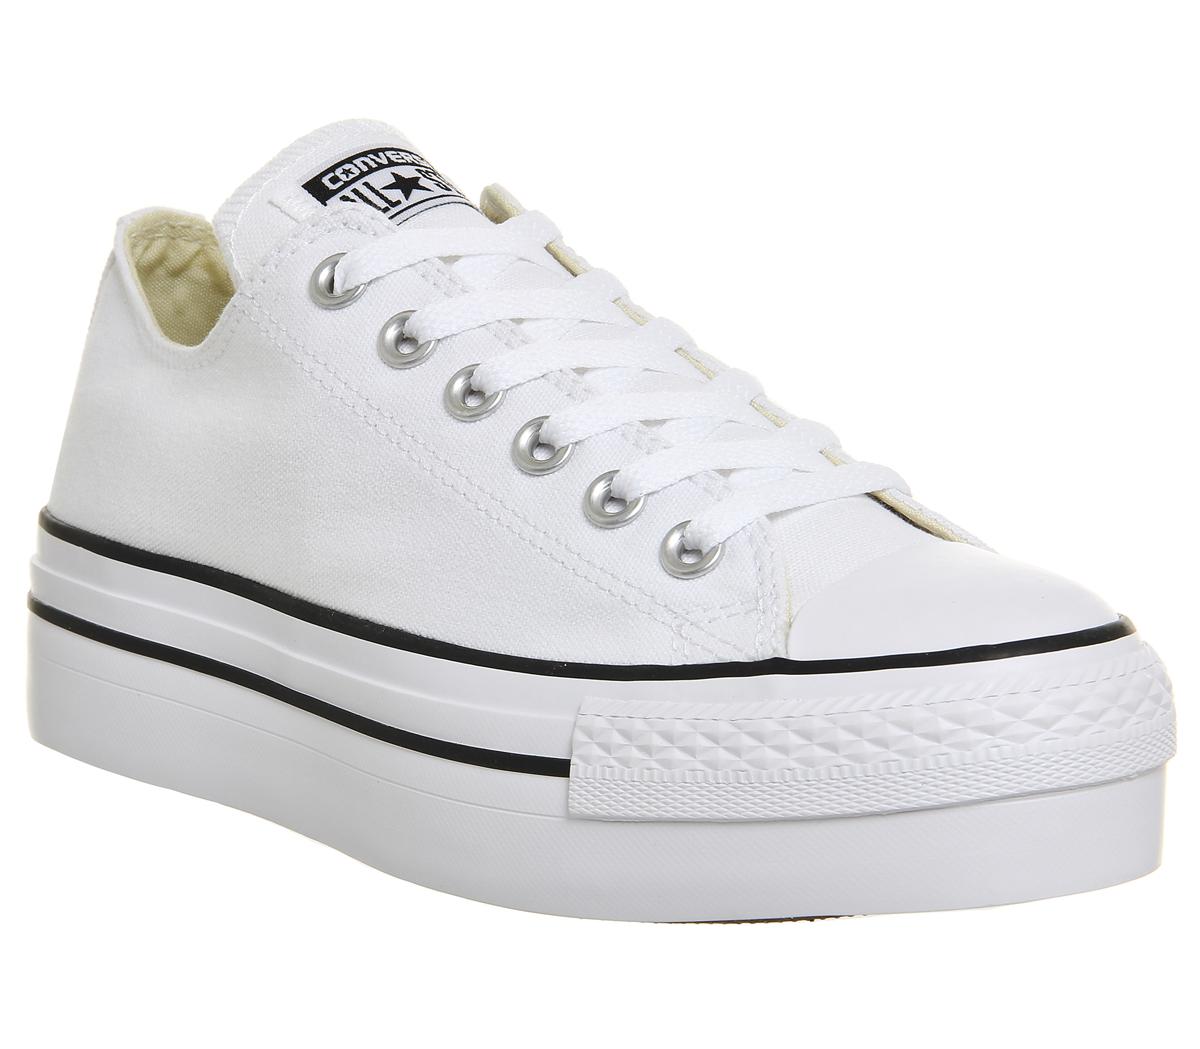 Converse All Star Low Platform White Hers Trainers